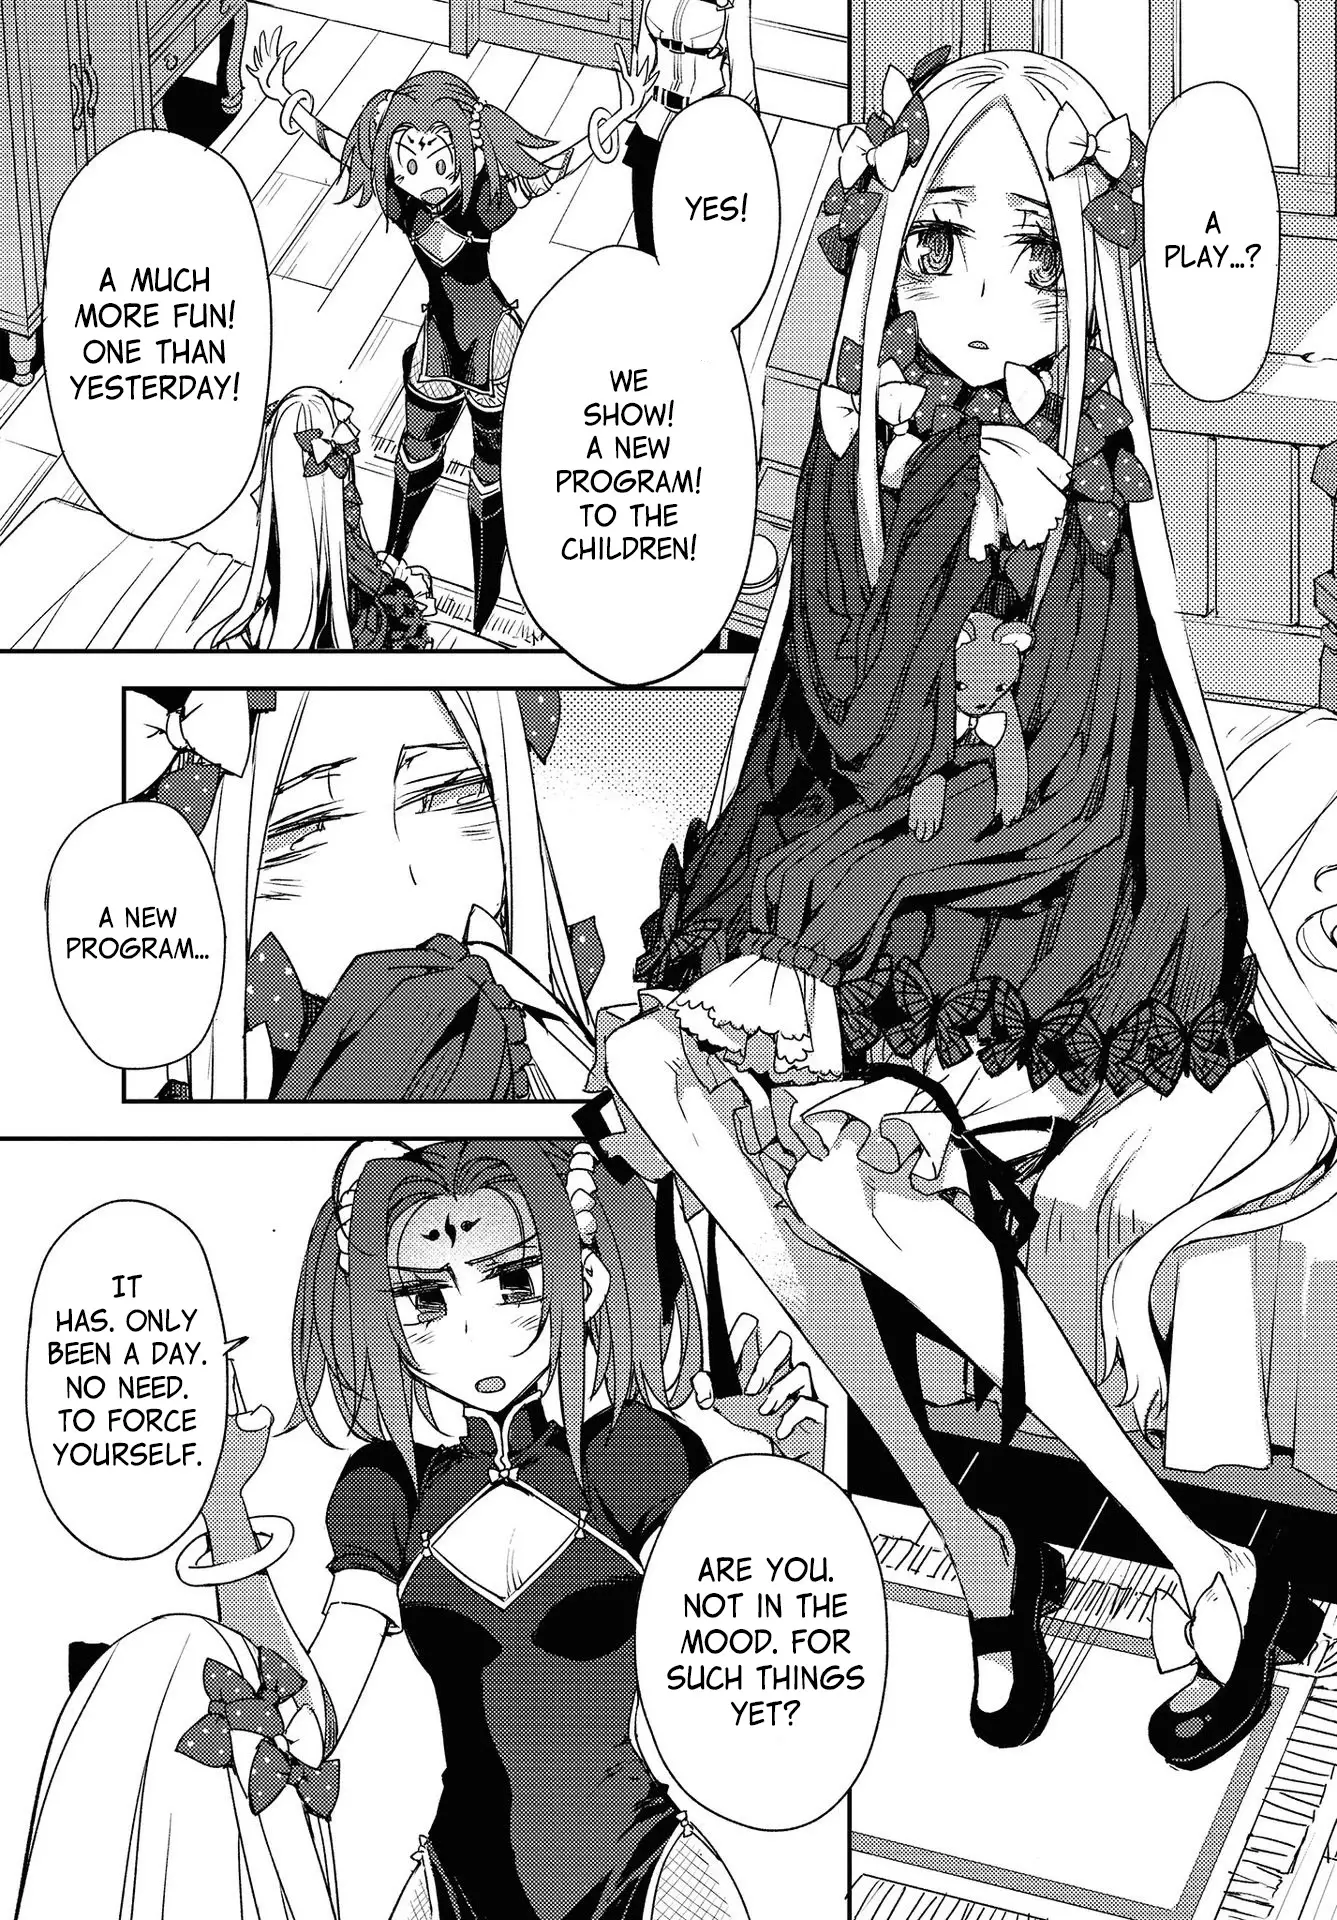 Fate/grand Order: Epic Of Remnant - Subspecies Singularity Iv: Taboo Advent Salem: Salem Of Heresy - 20 page 15-aa8d24db